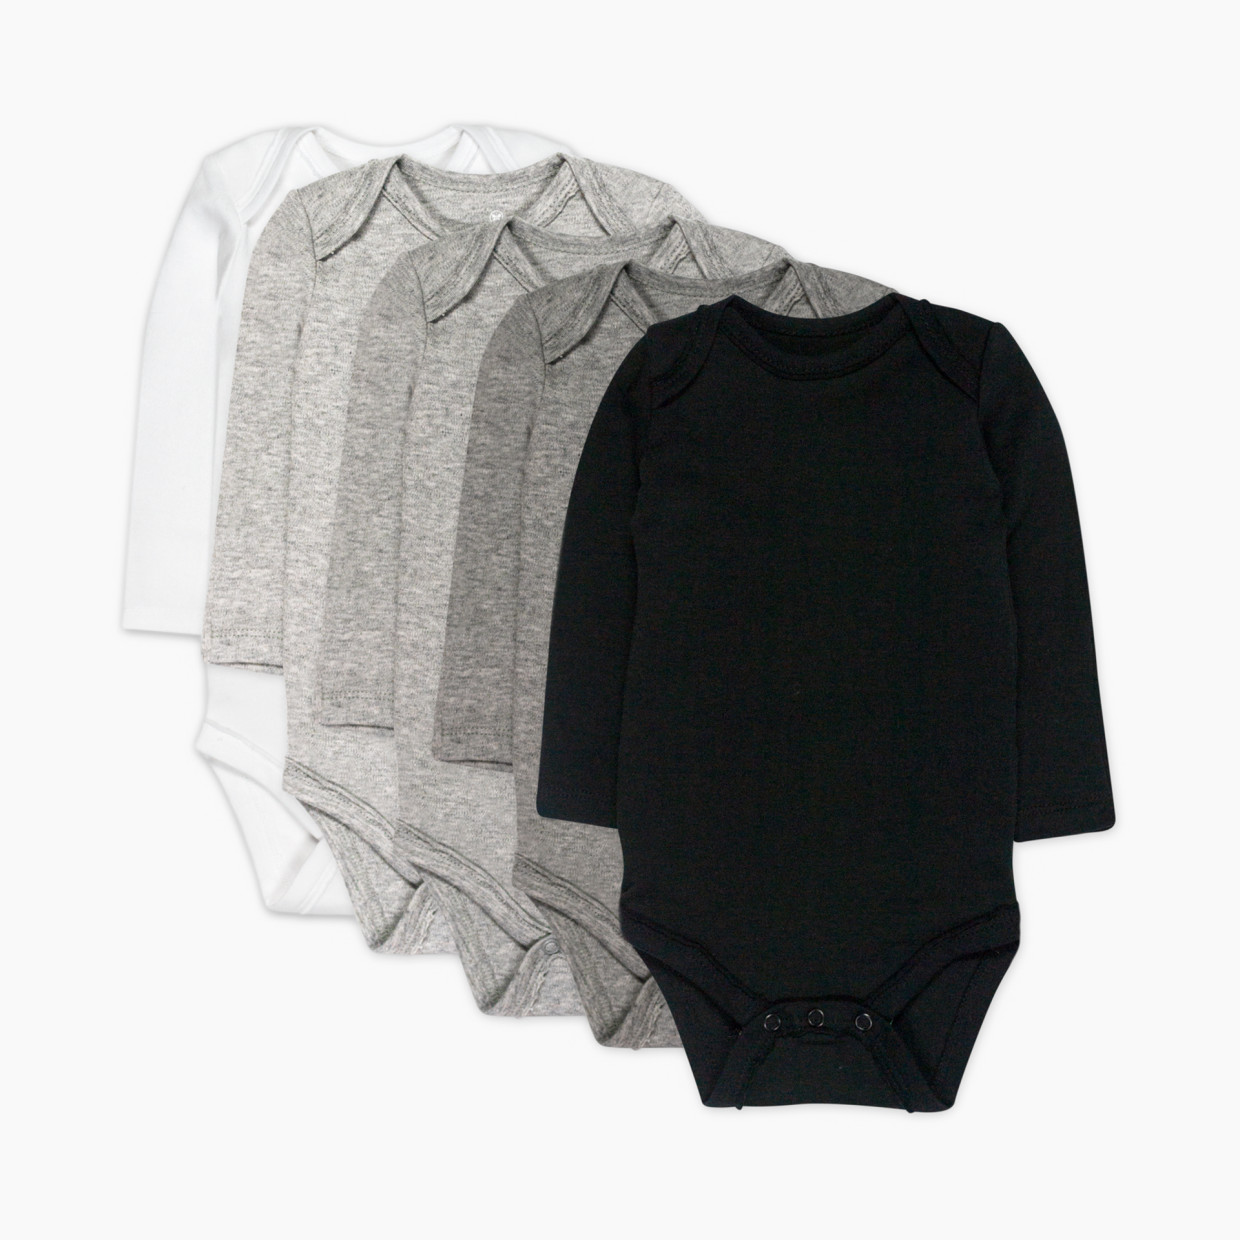 Honest Baby Clothing 5-Pack Organic Cotton Long Sleeve Bodysuit - Gray Ombre, Nb, 5.